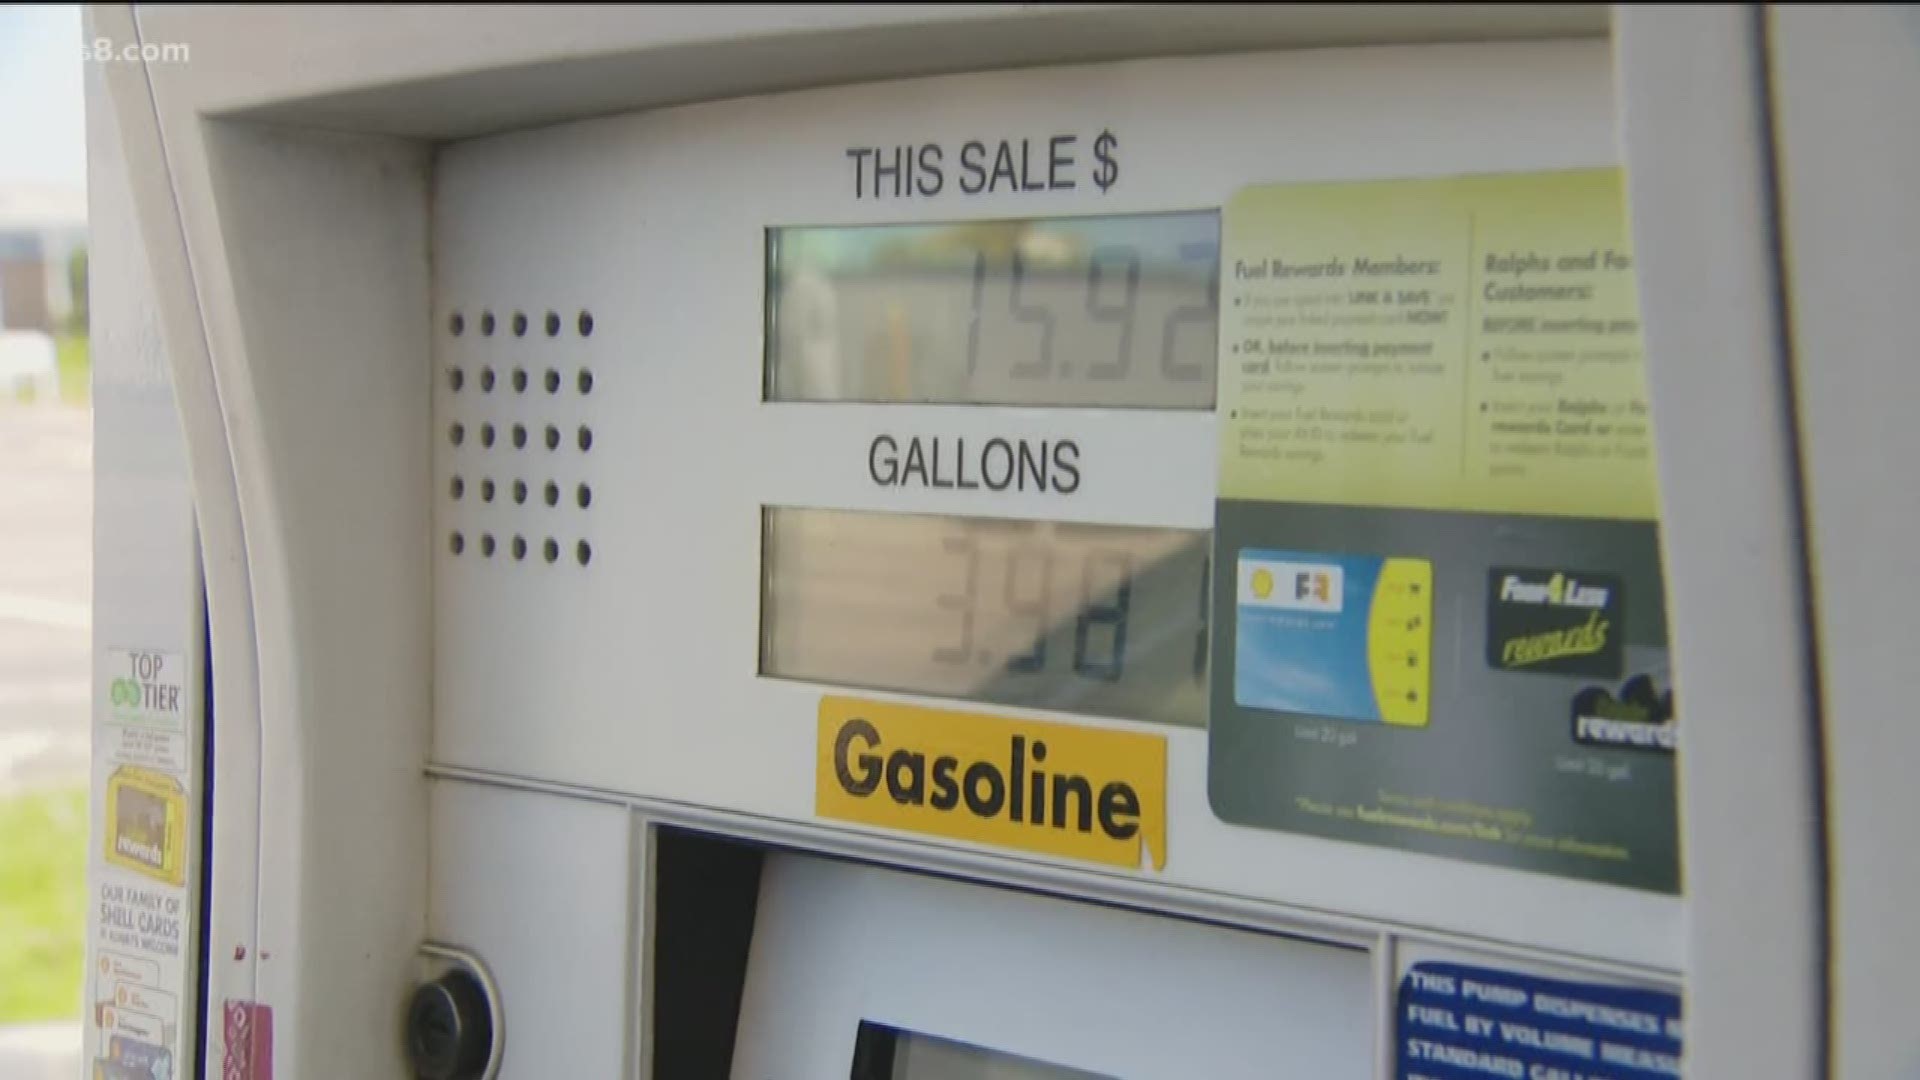 Costco gas prices can be cheap, but shopping at Vons and Ralphs can help you save at Chevron and Shell, too.